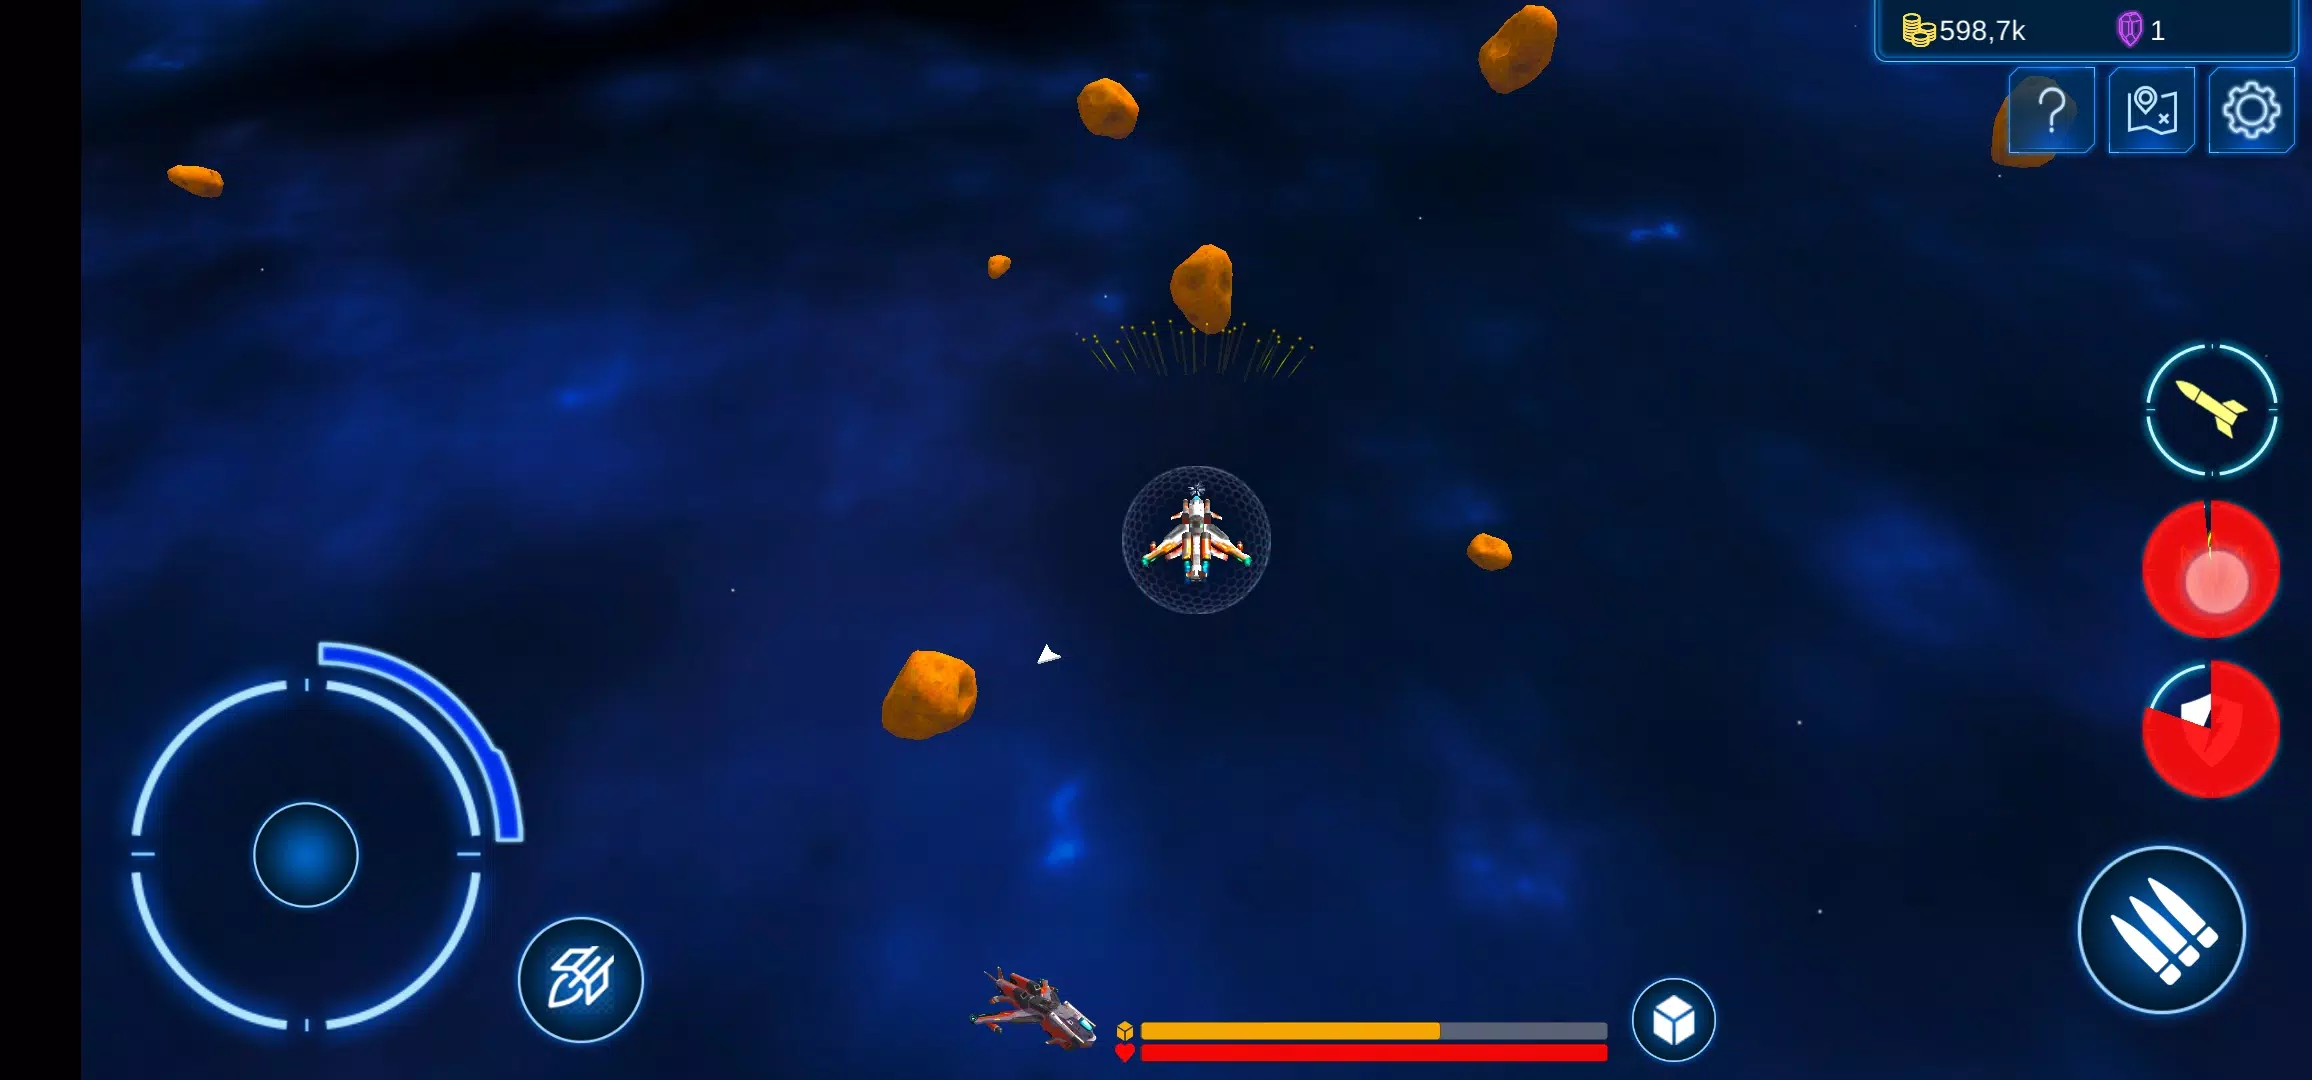 Download Space Miner Simulator android on PC